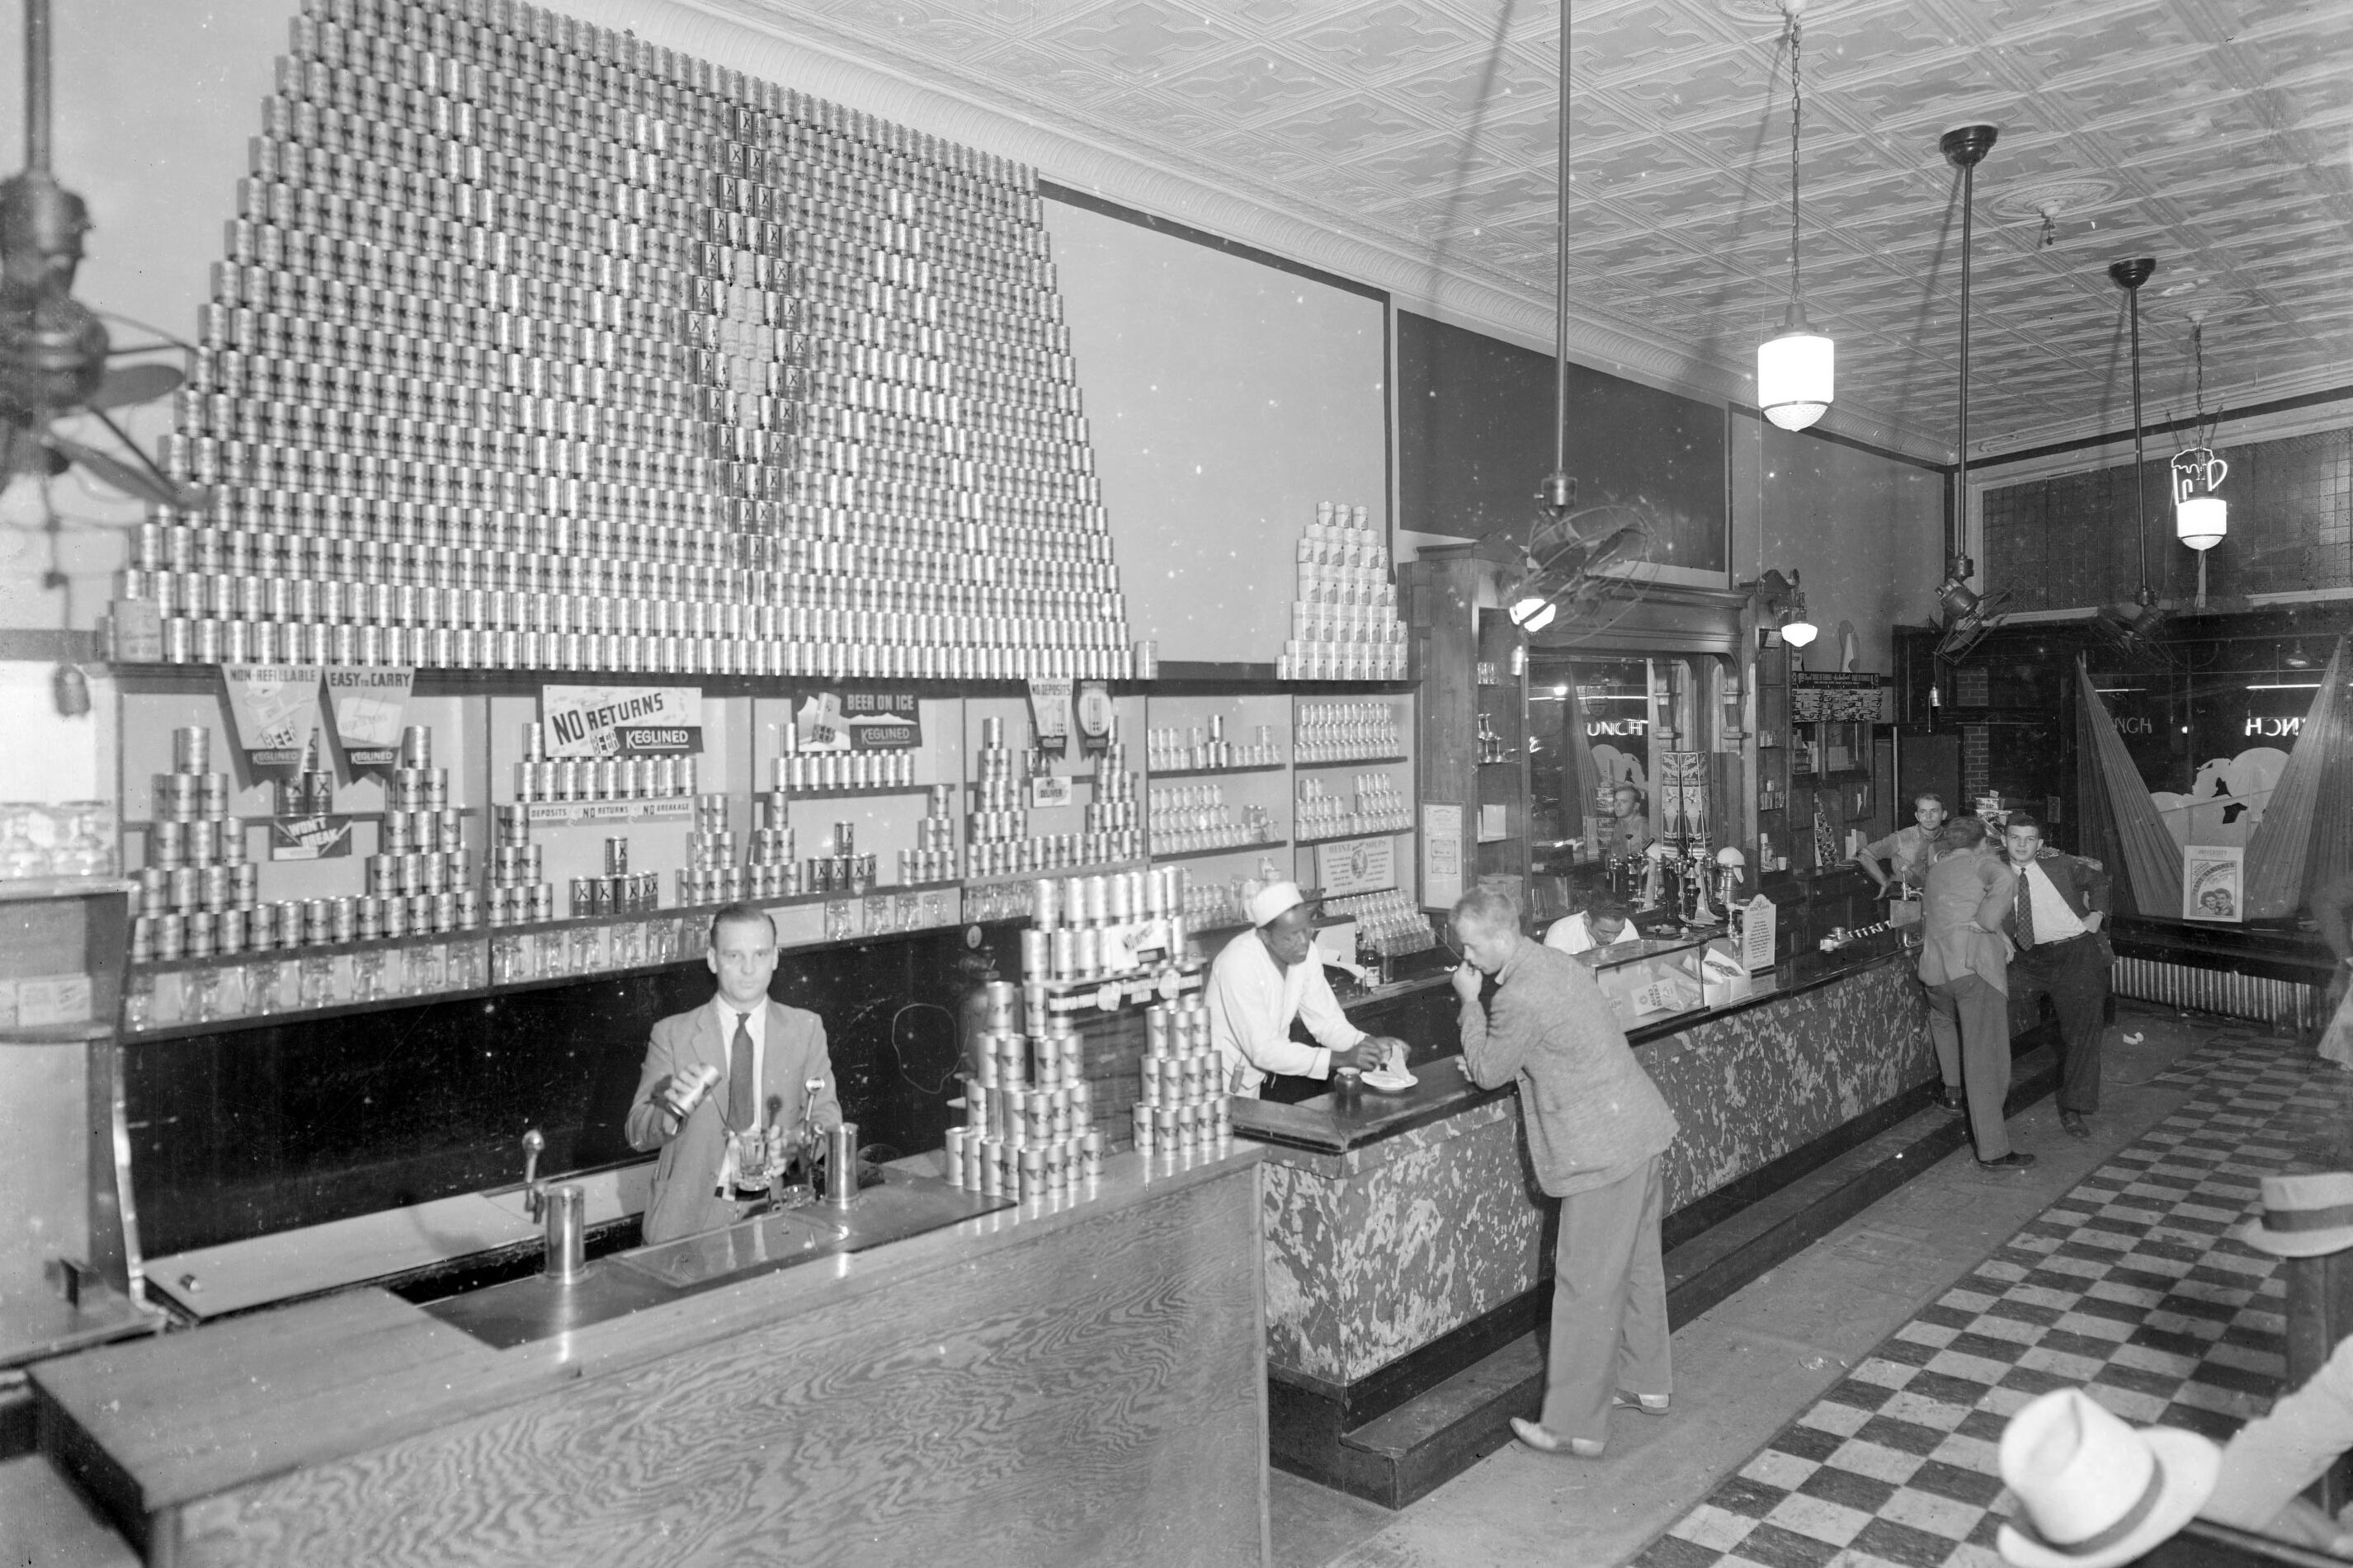 Black and white image of the inside of the Cavalier diner